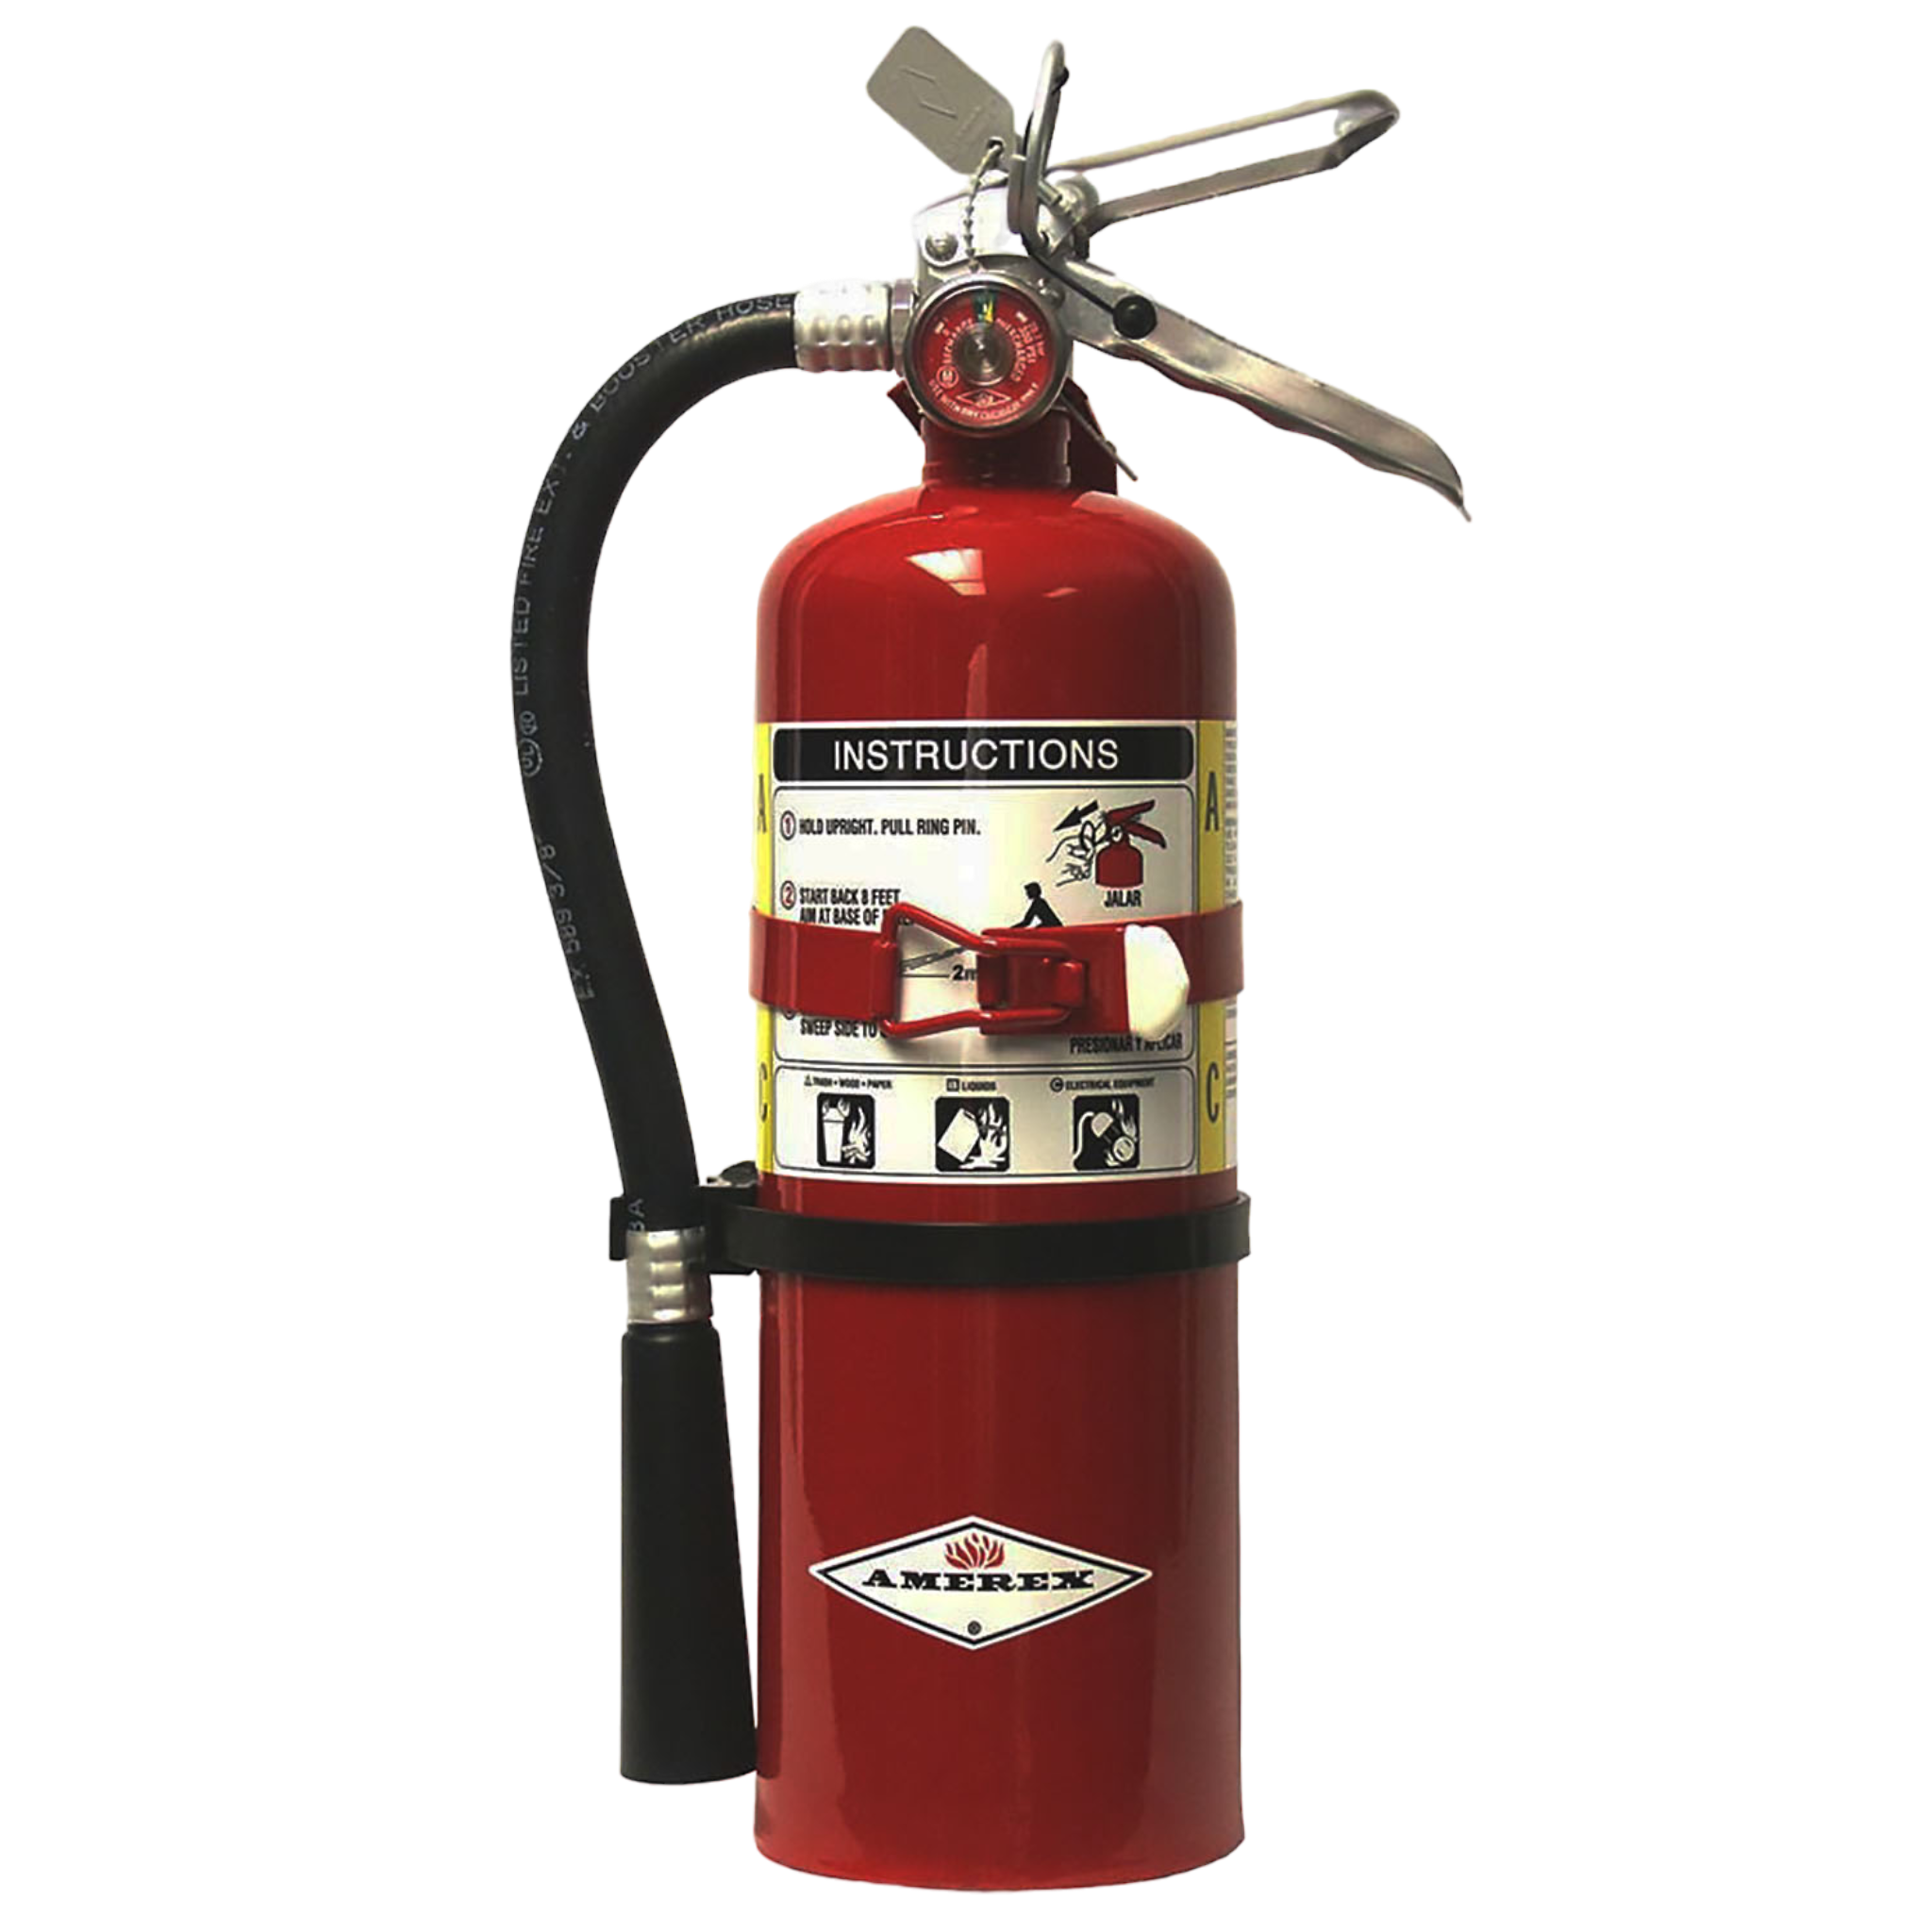 Amerex B500T ABC Dry Chemical Fire Extinguisher with Aluminum Valve and Vehicle Bracket, 5 lb. - Pro-Distributing